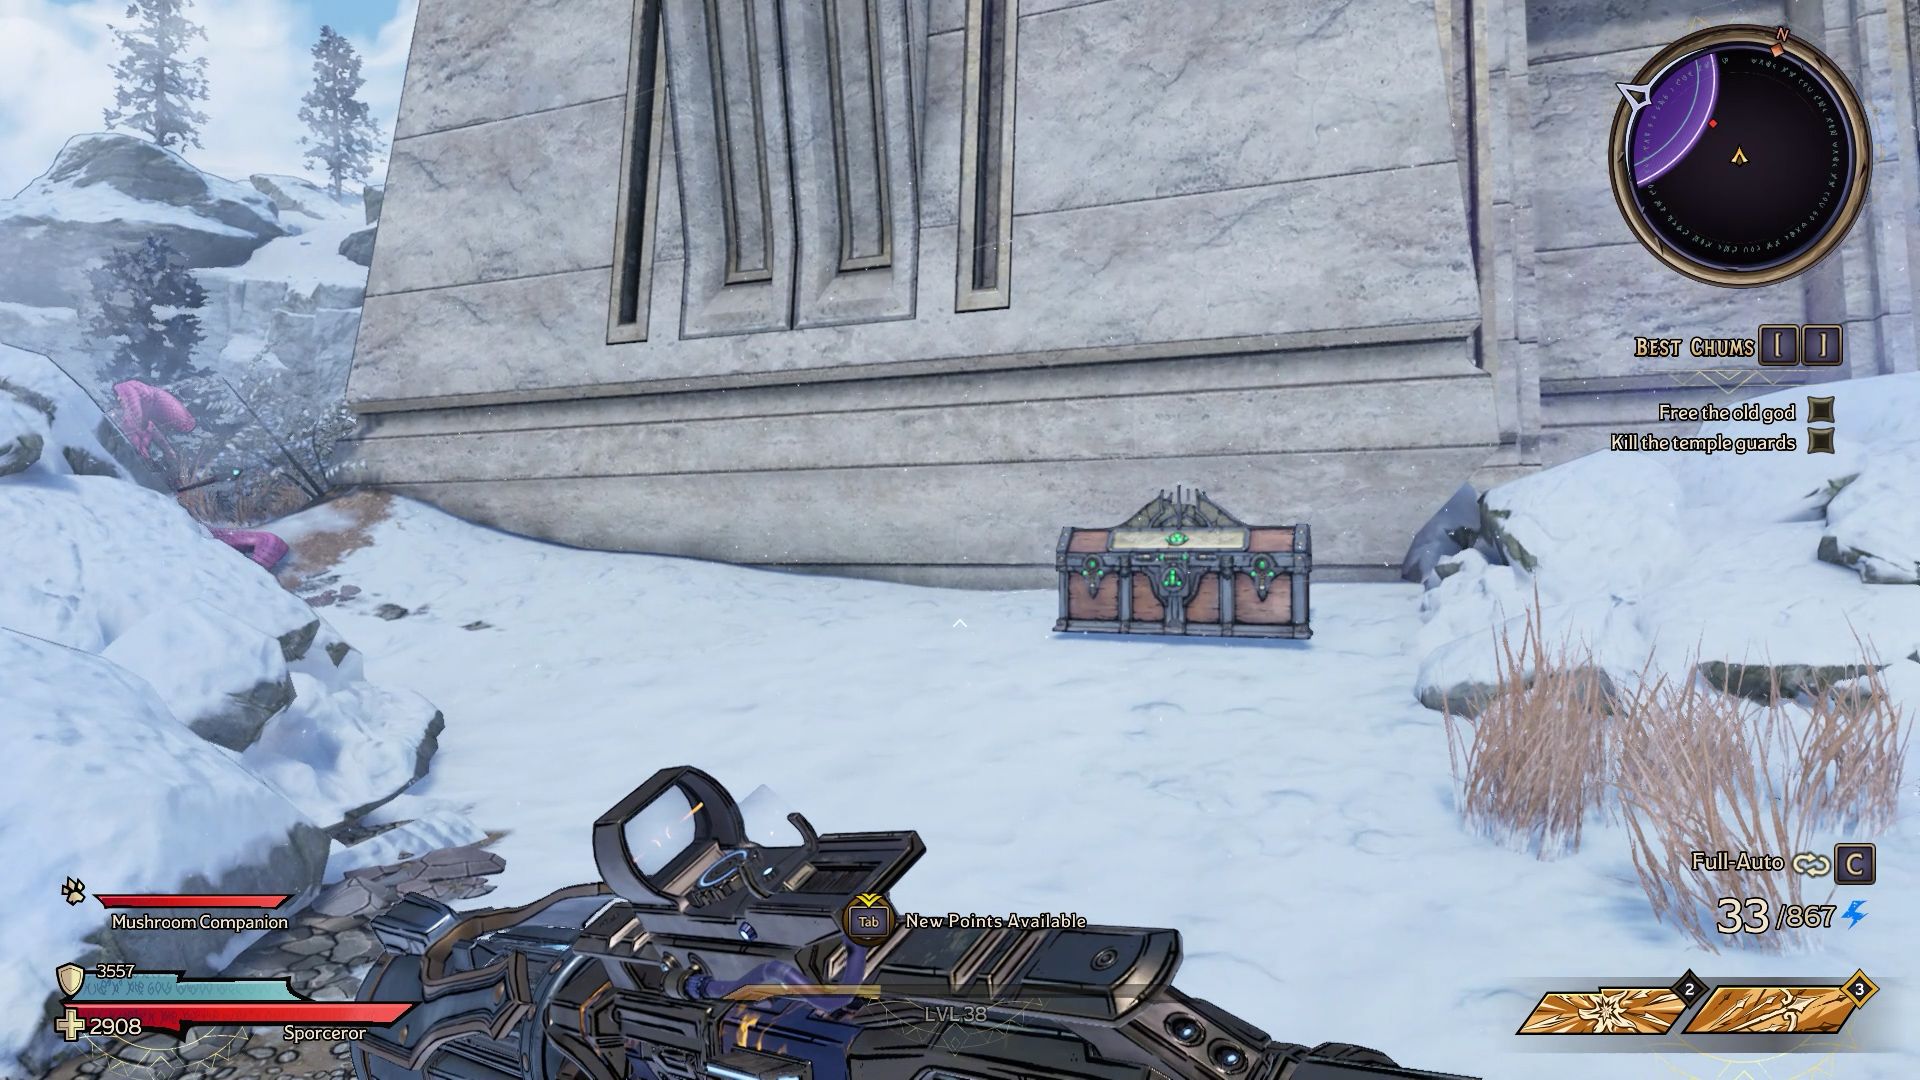 Player looks at Area 1 Soul Chest 1 on side of building in snow